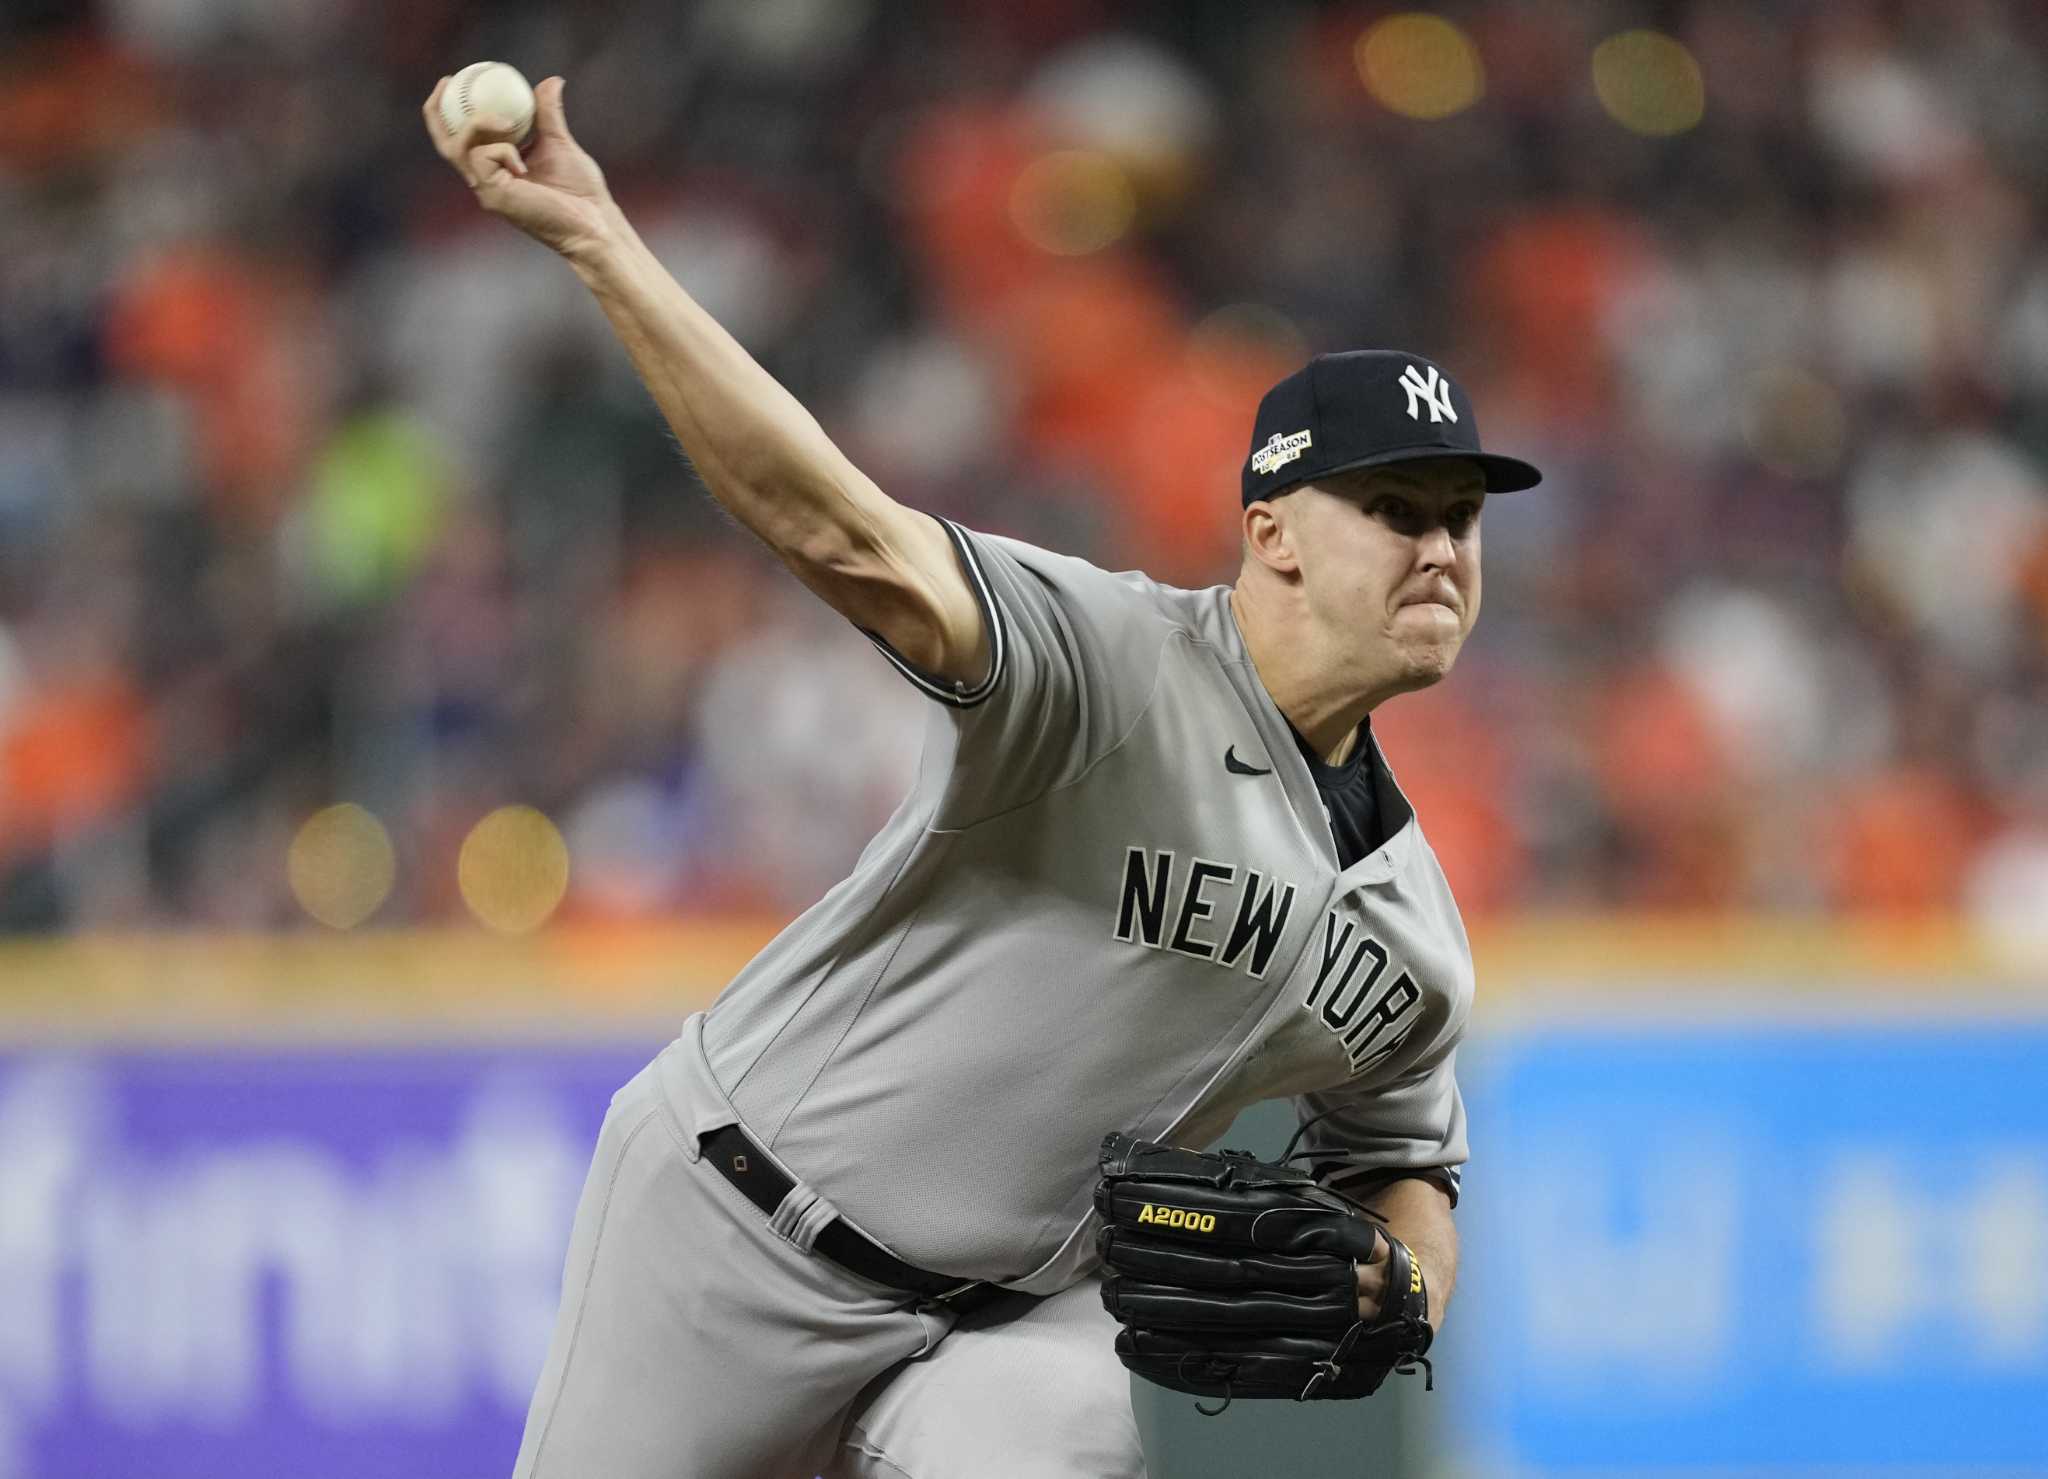 New York Yankees news: No more limits for Jameson Taillon